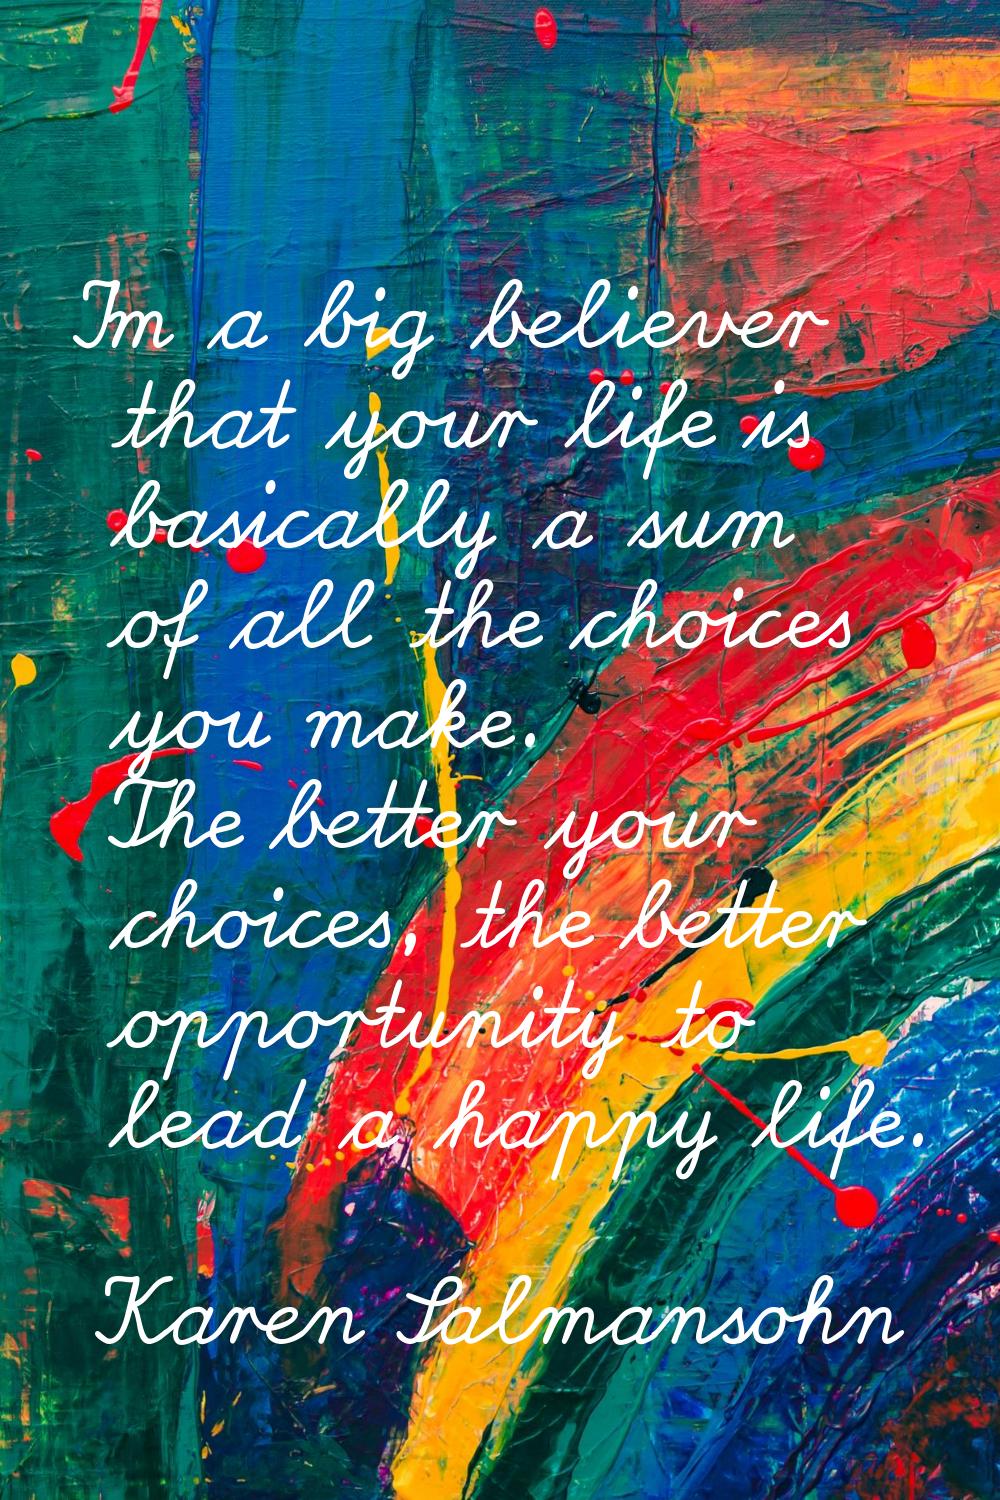 I'm a big believer that your life is basically a sum of all the choices you make. The better your c